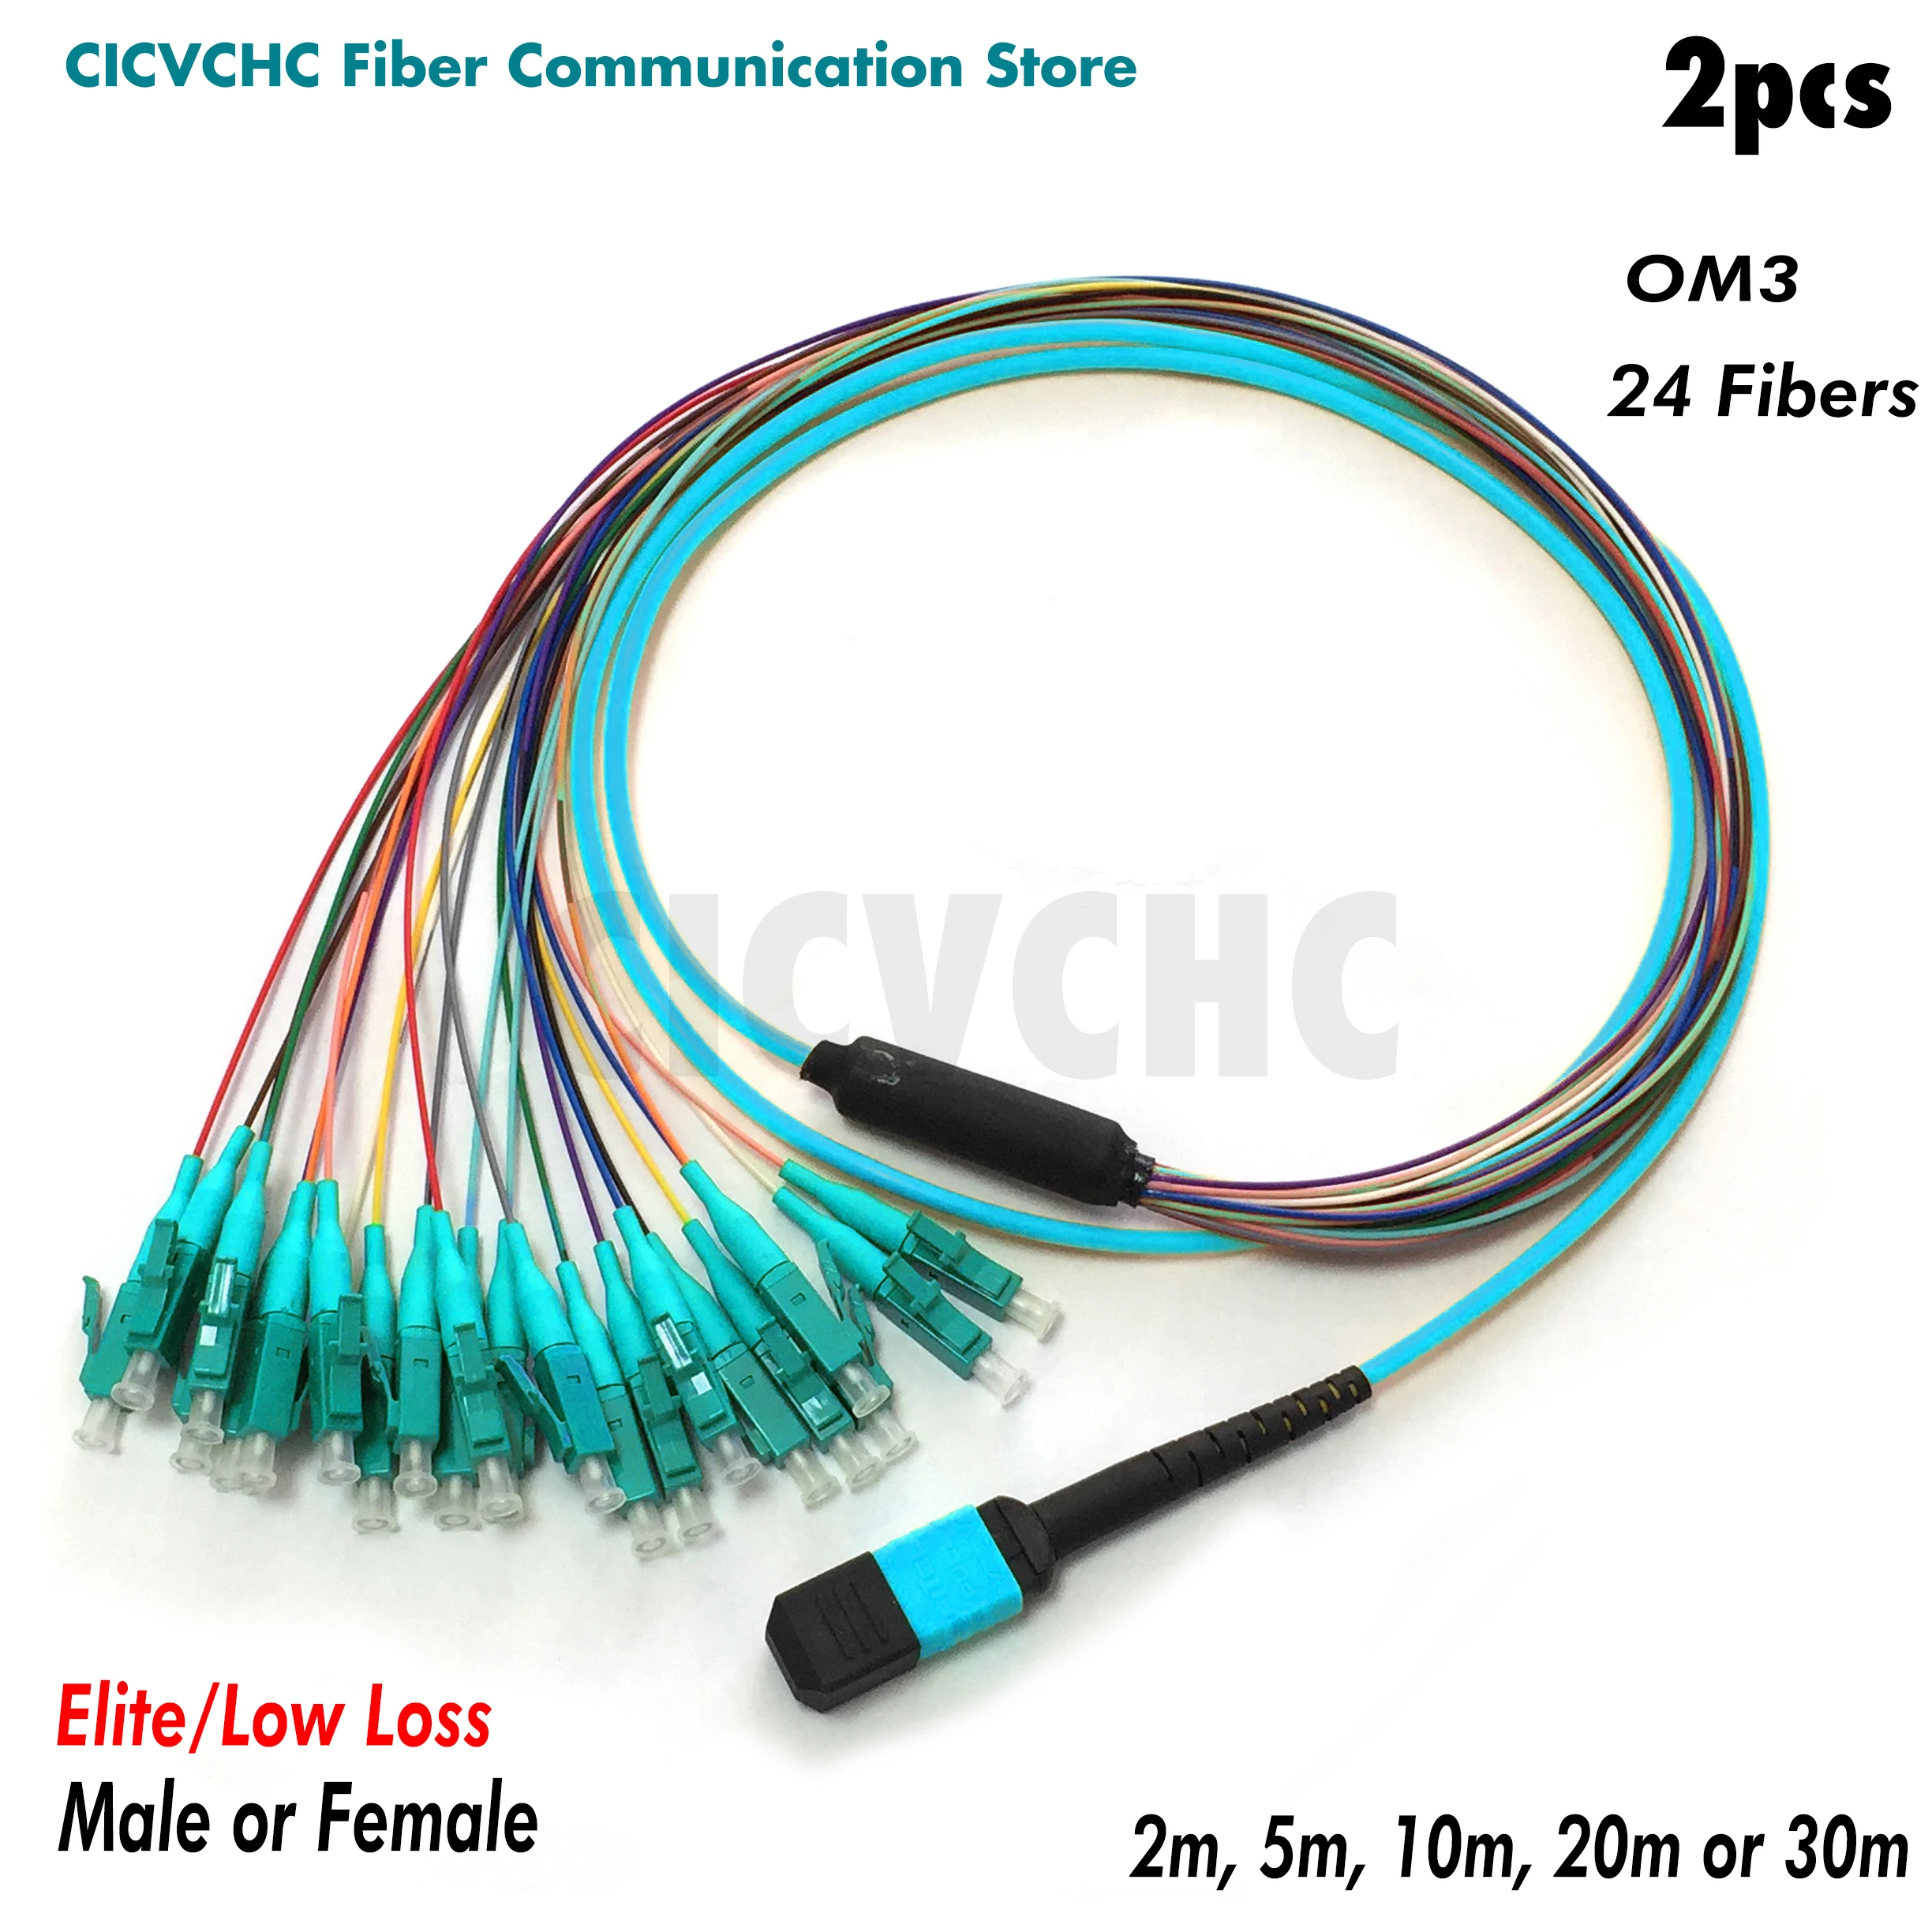 2pcs 24 fibers-MPO/UPC Fanout LC/UPC -OM3-300-Elite/Low loss-Male/Female with 0.9mm-2m to 10m/MPO Assembly